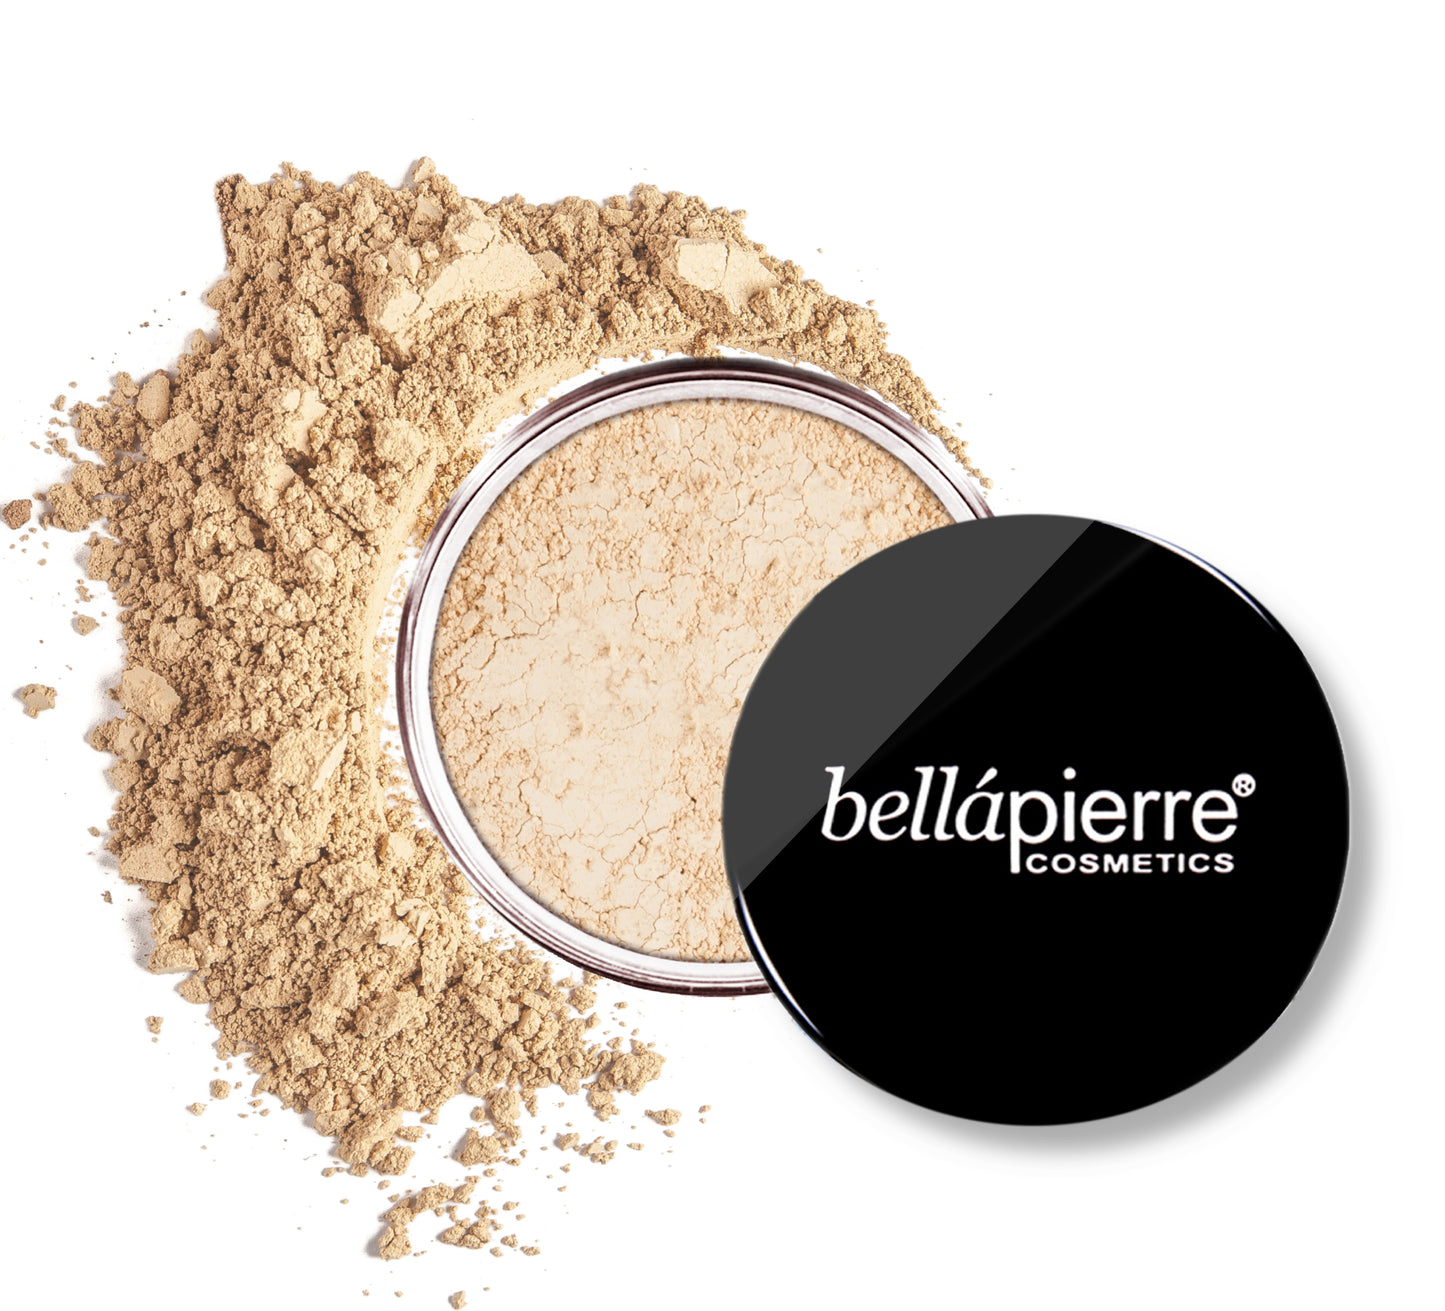 Load image into Gallery viewer, Bellapierre Loose Mineral Foundation | All Skin | Vegan Beauty | Cruelty Free | Mineral Makeup | Ethical | SPF 15 | Concealer and Foundation
